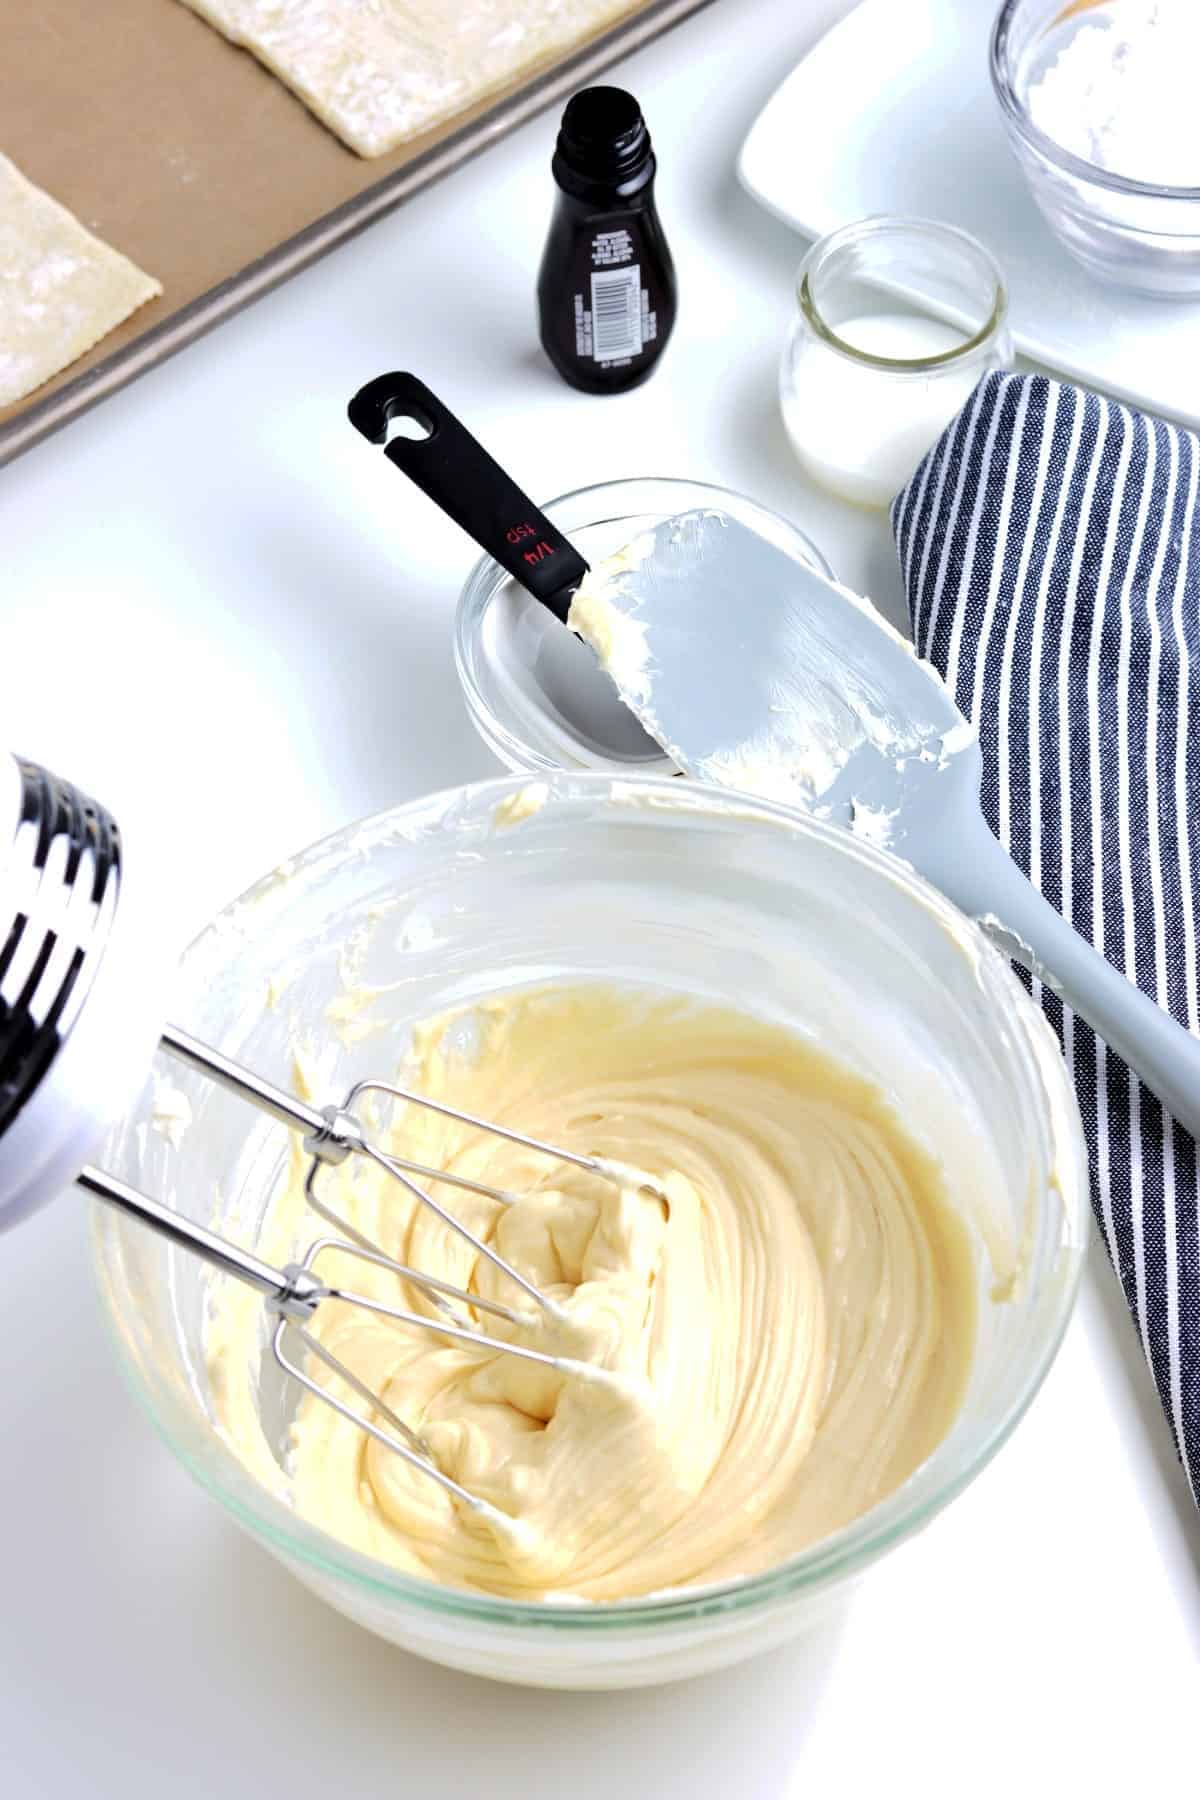 Cream cheese in a bowl with other ingredients and whipped smooth.